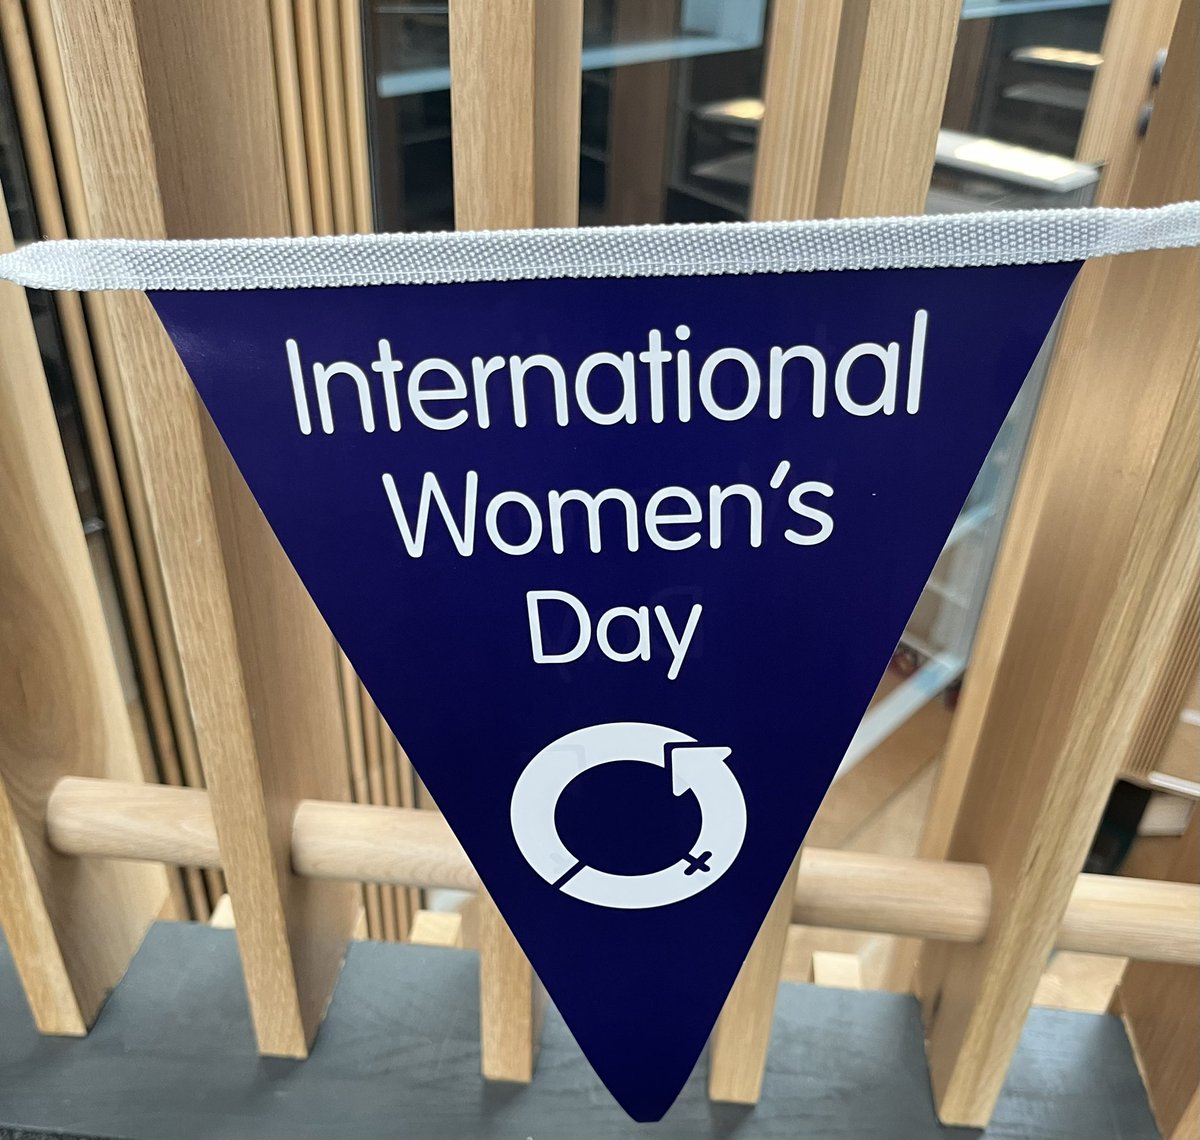 Happy international women’s day #IWD24!! To all our colleagues, students, graduates, partners and stakeholders. Great to have so many amazing and supportive people working with us @UlsterUni @UlsterUniSoNP